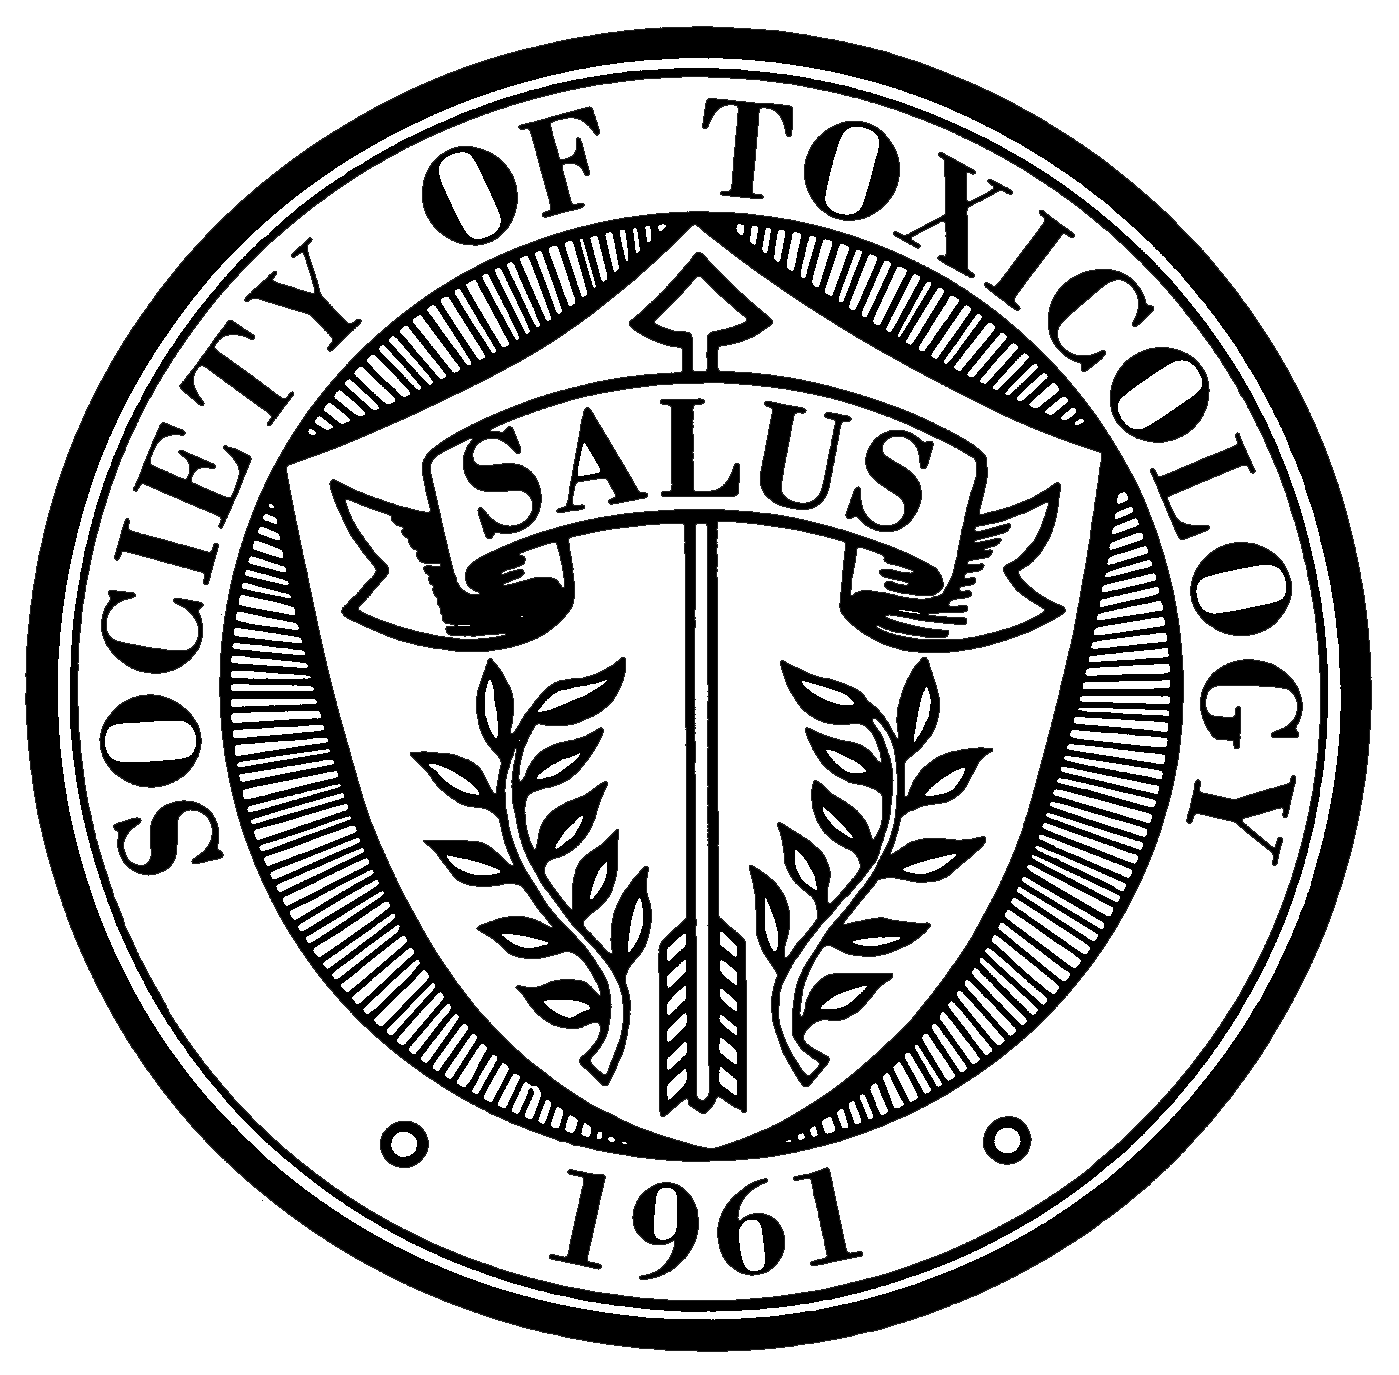 Society of Toxicology Annual Meeting